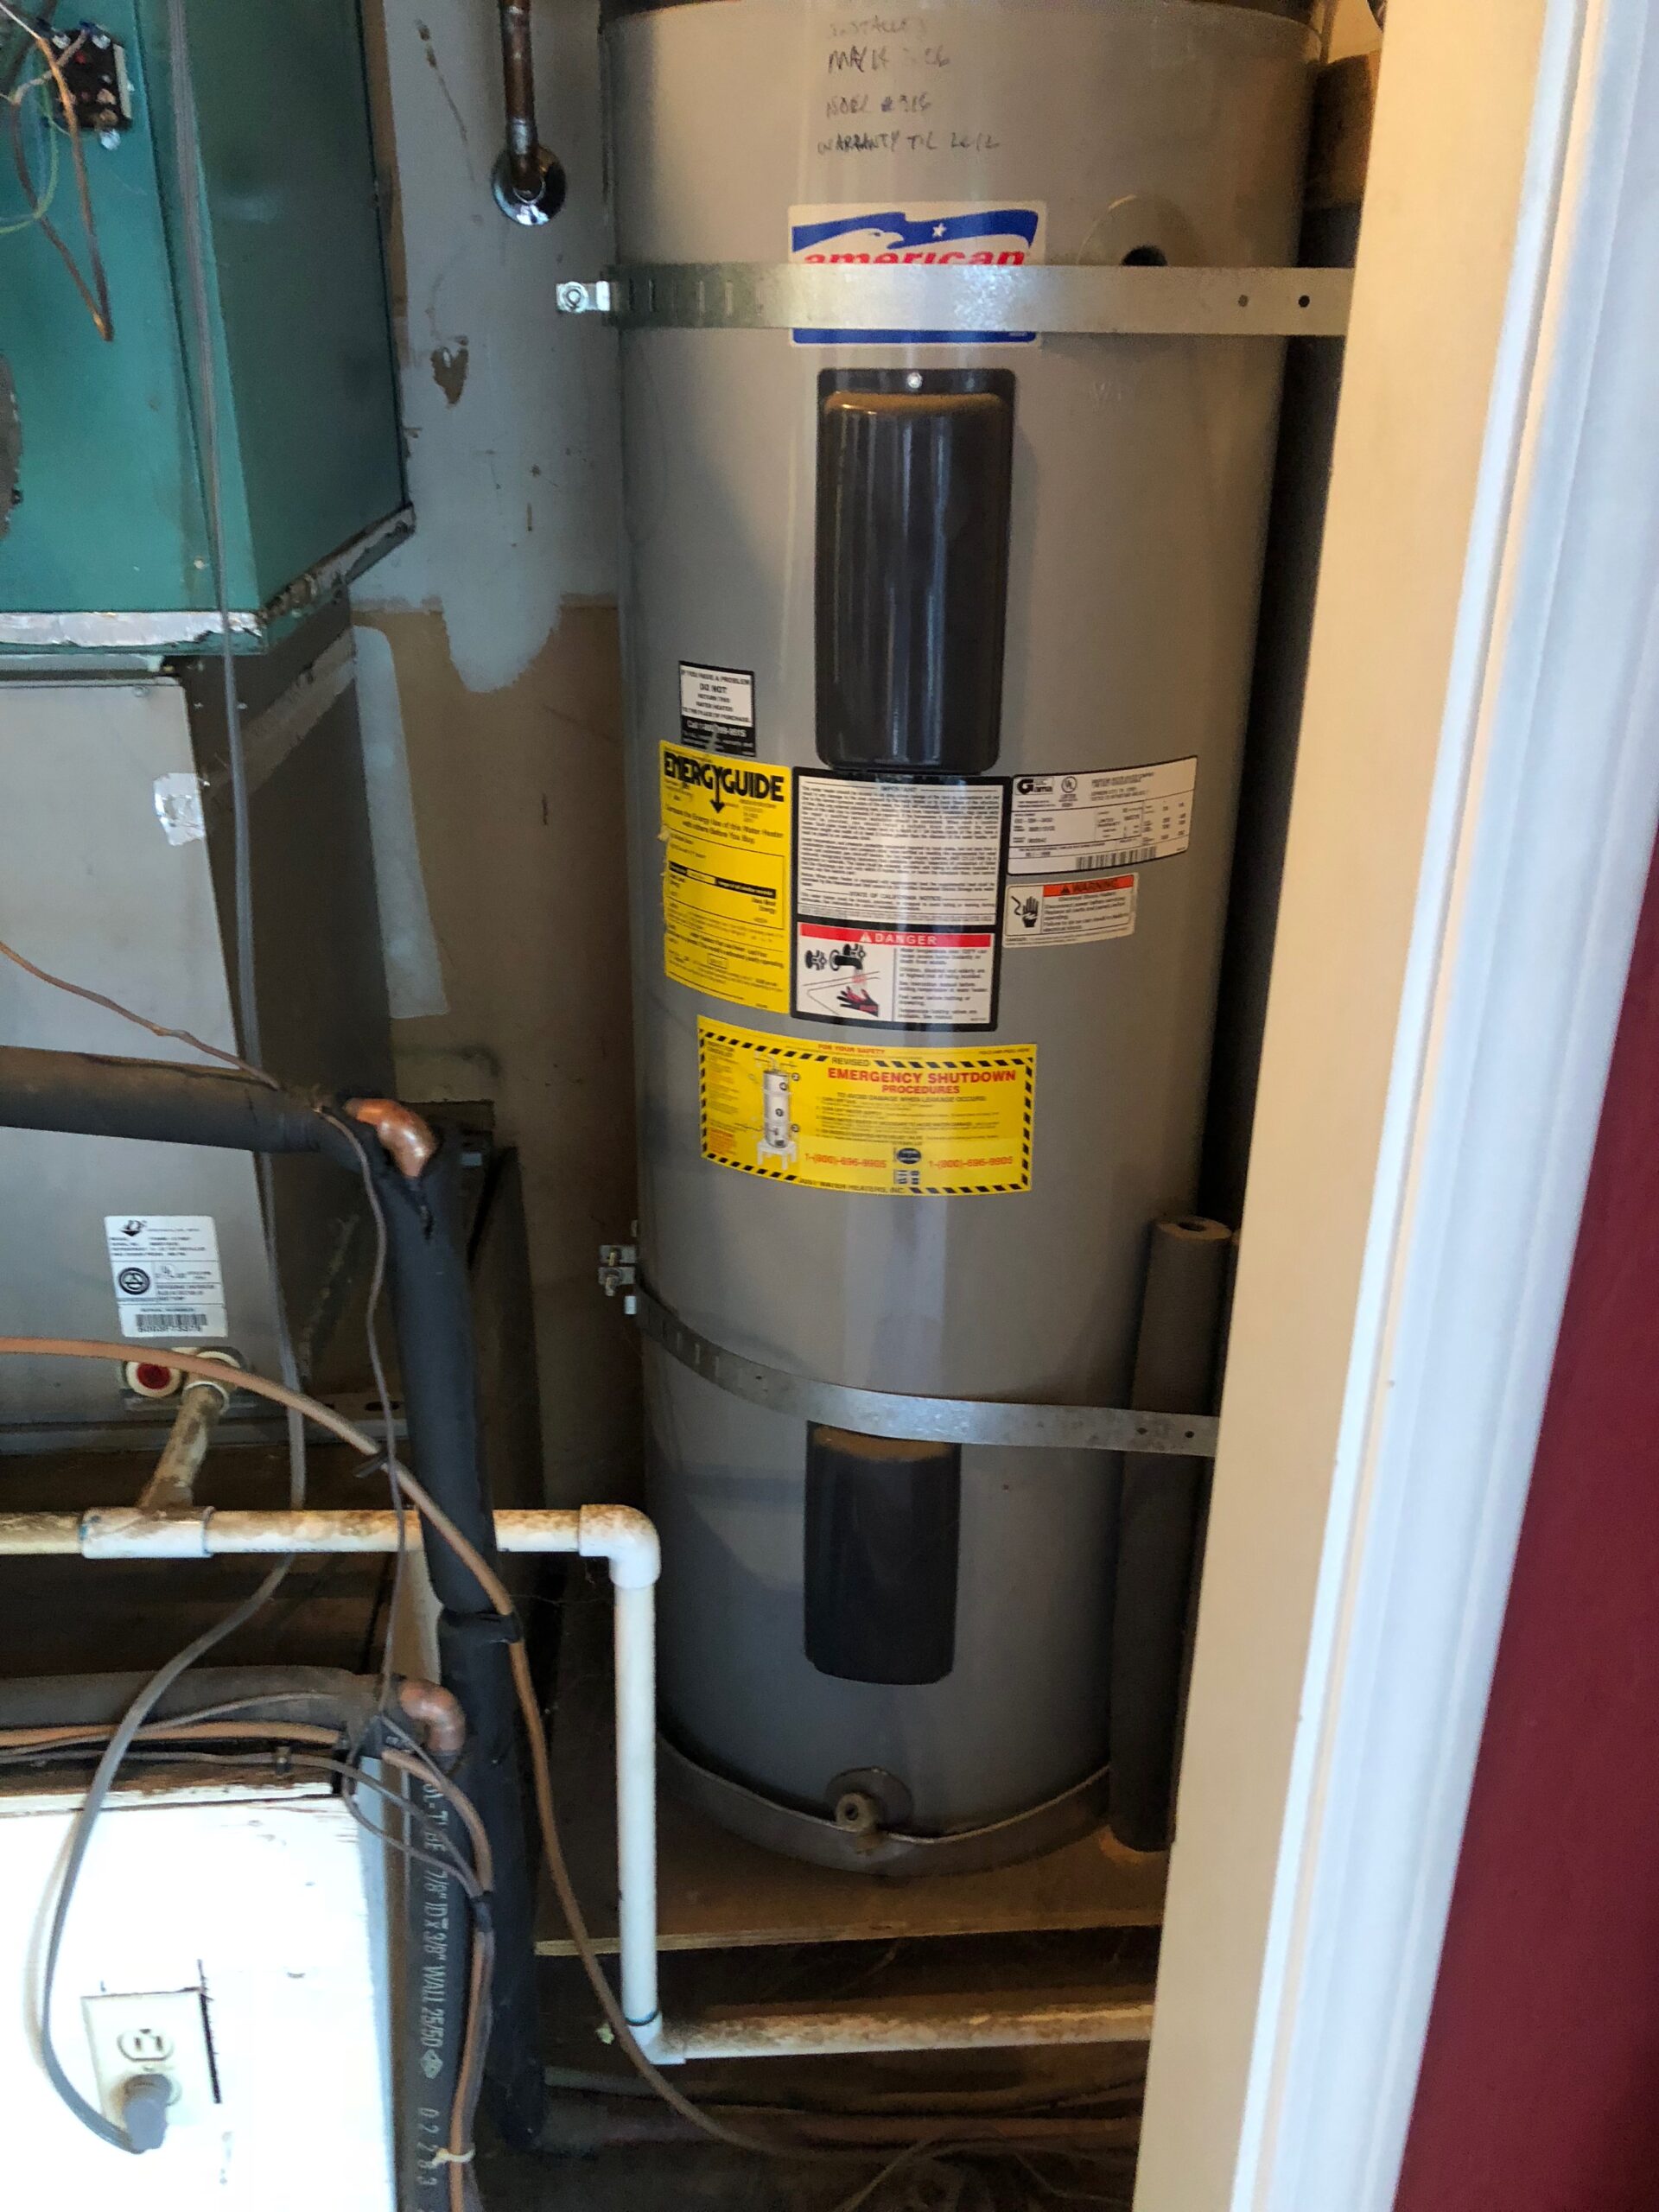 Replacing the Second Hot Water Heater